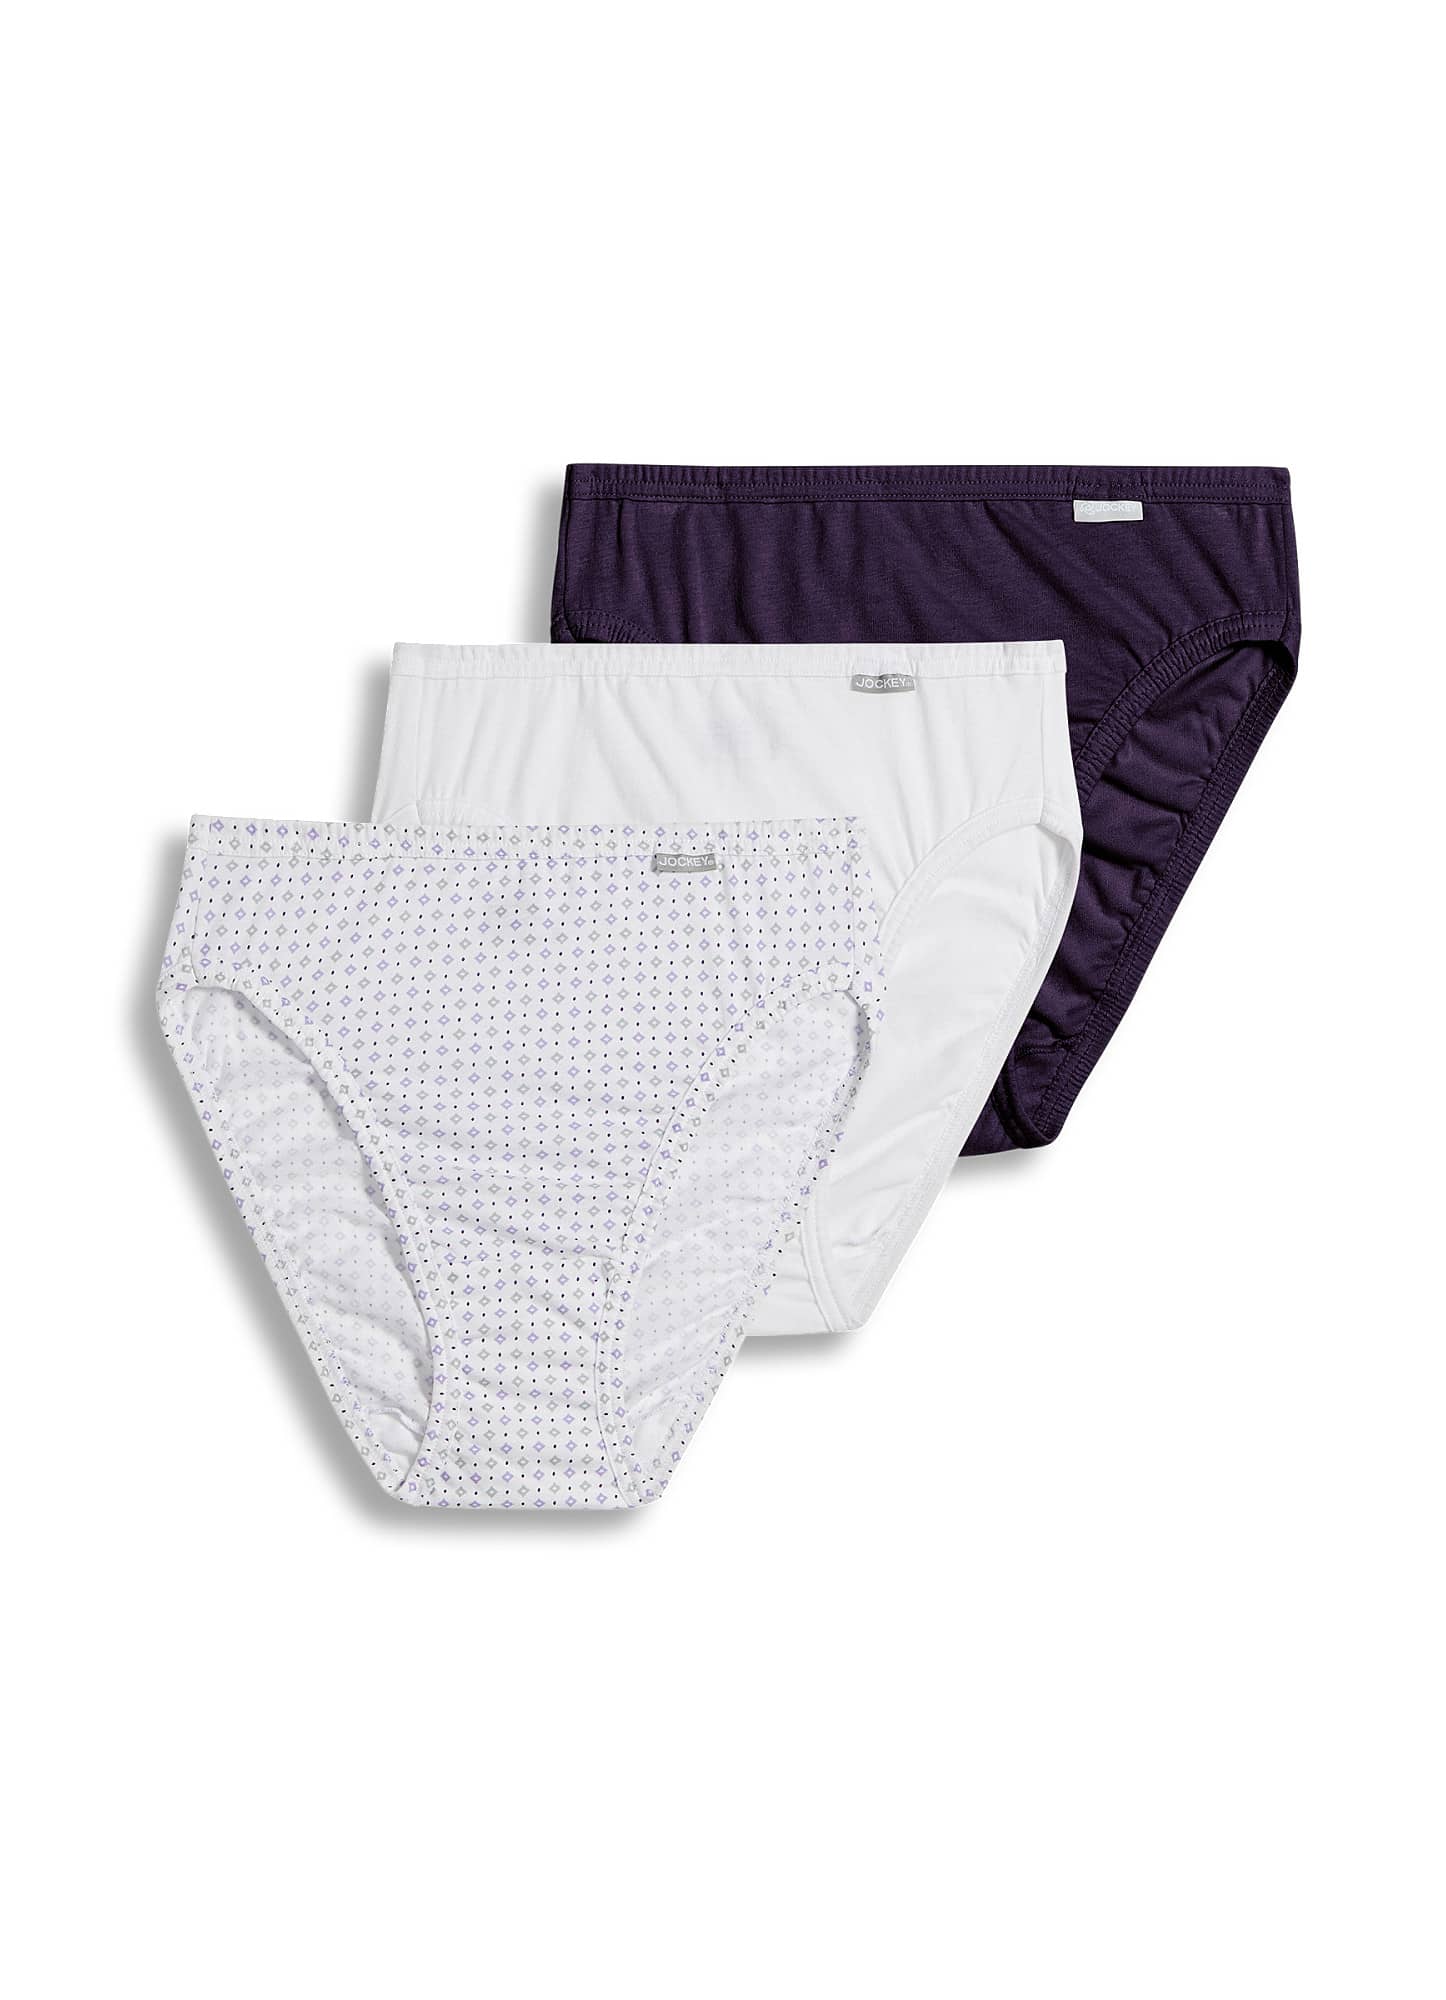 Jockey Classic Fit Size 6 Elance French Cut Panties White Combed Cotton for  sale online